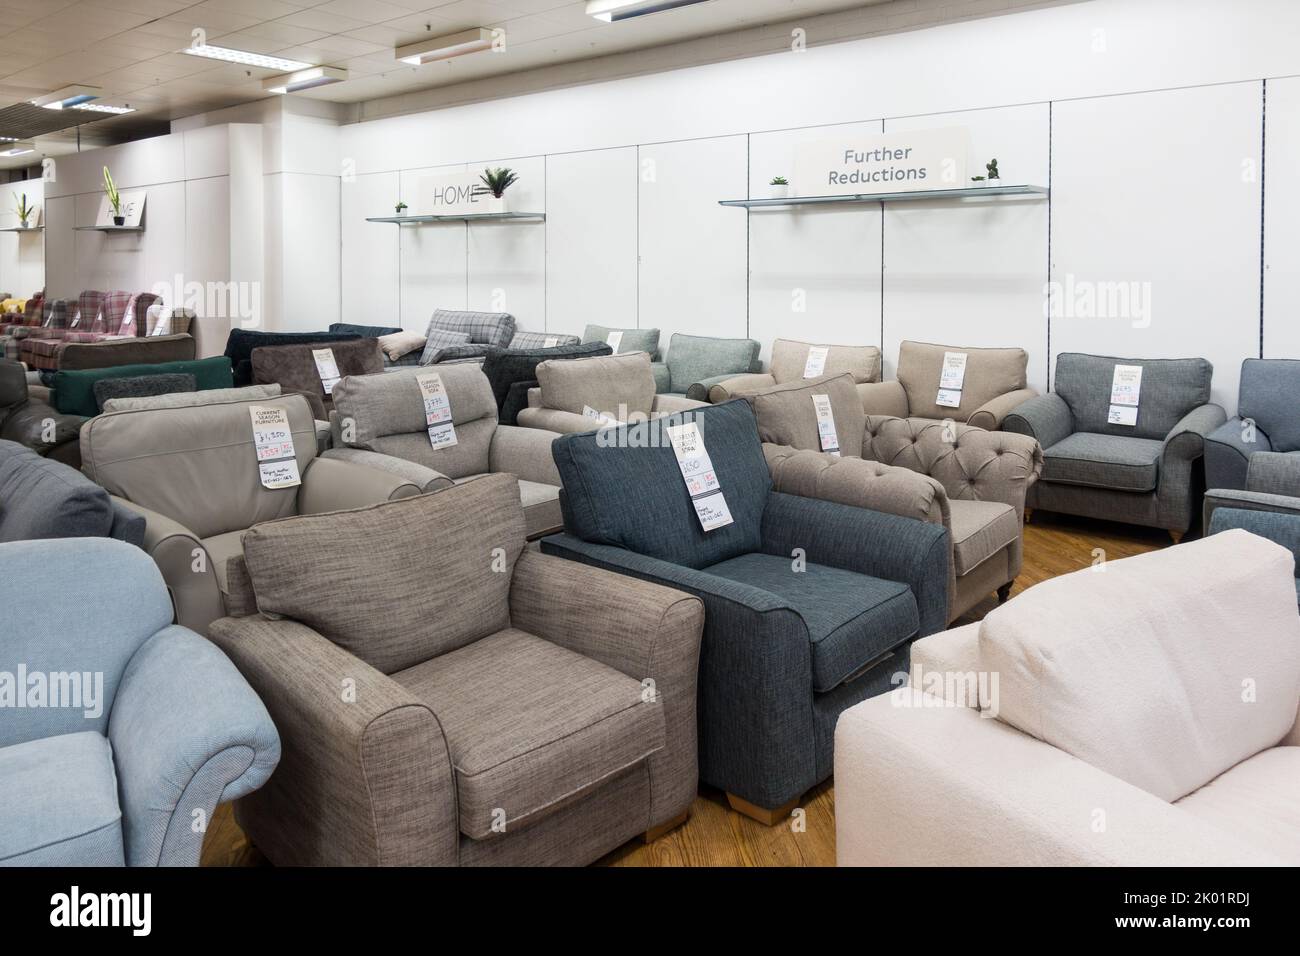 Reduce price Sofa in an outlet space Stock Photo